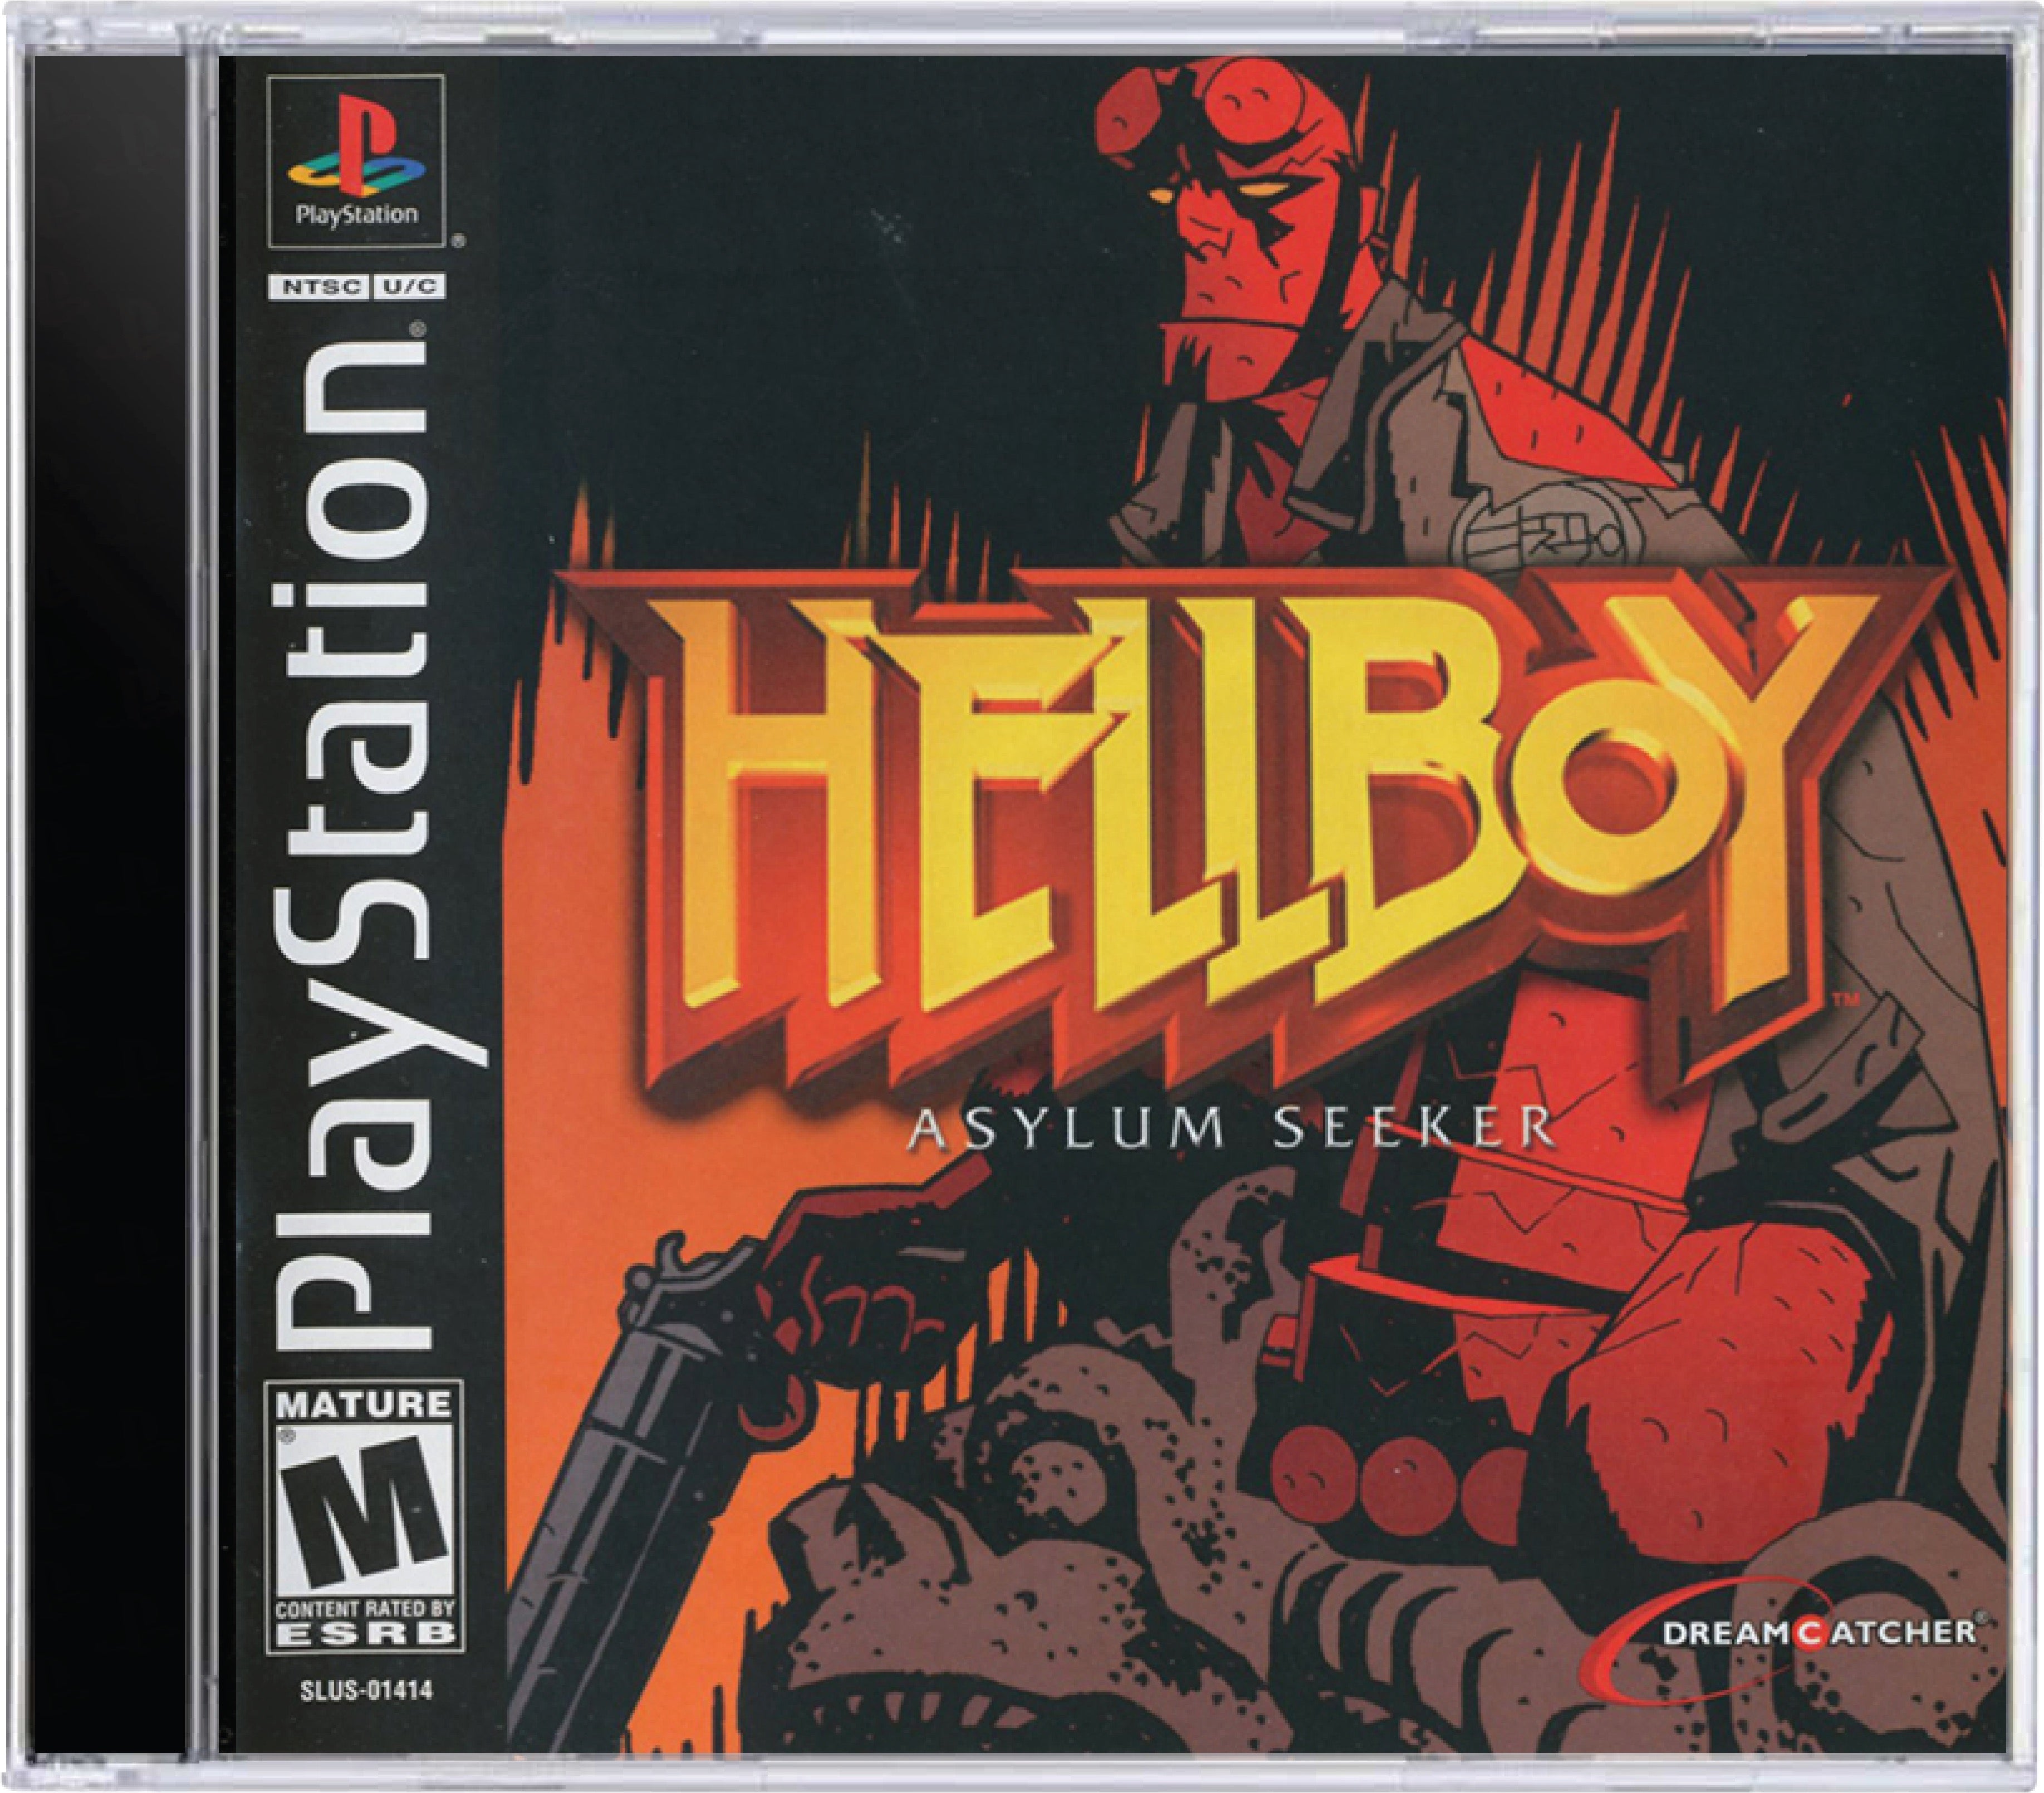 Hellboy Asylum Seeker Cover Art and Product Photo